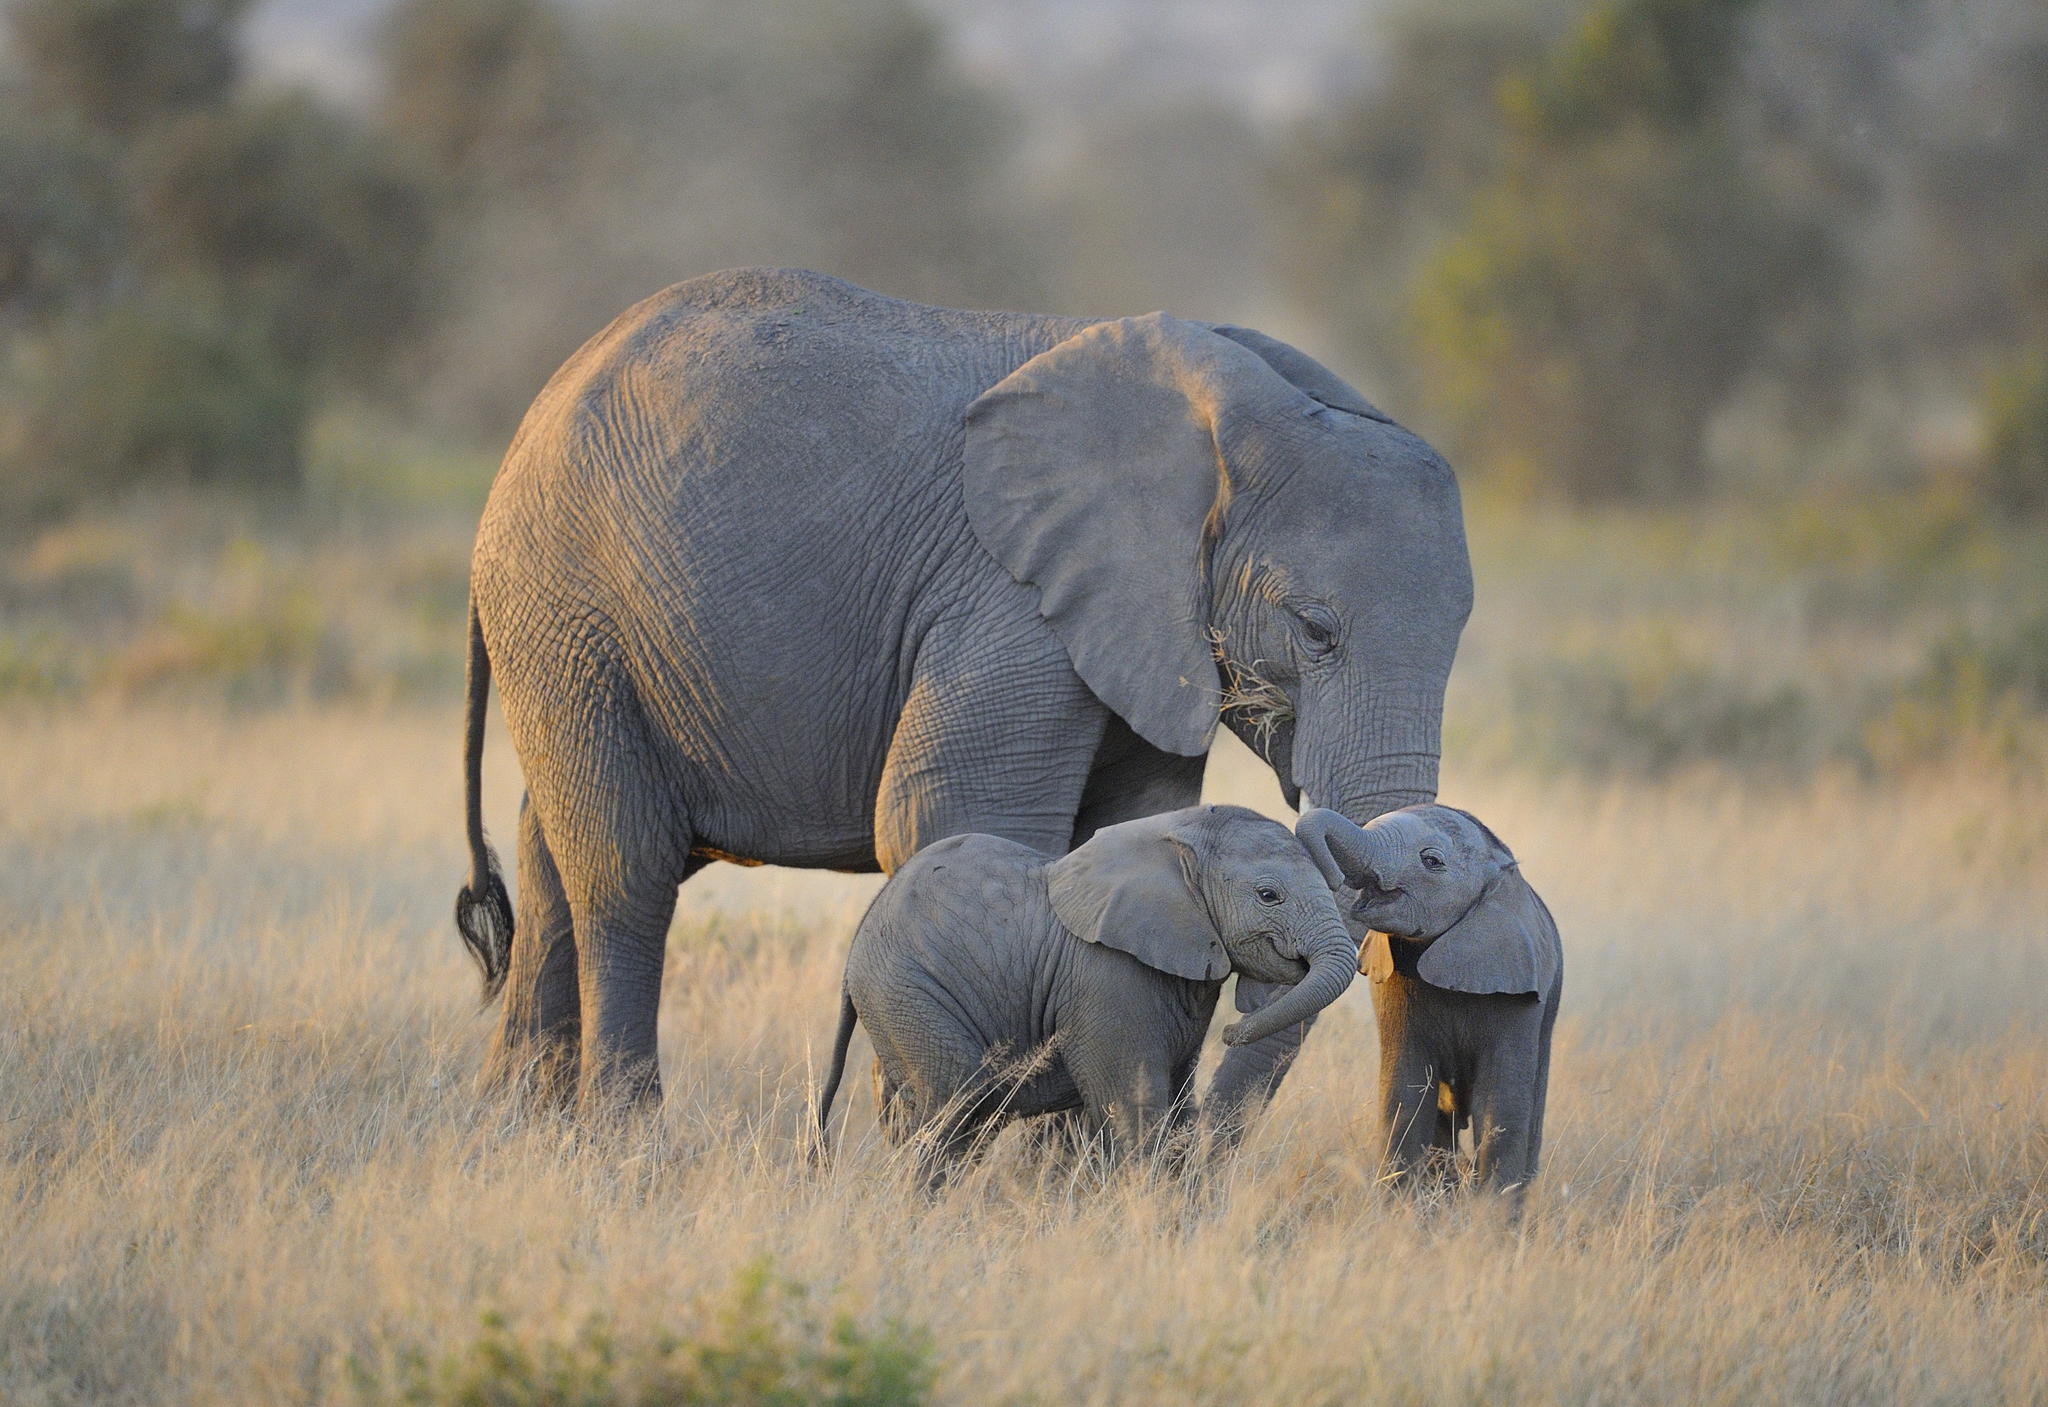 29 Adorable Baby Elephants Photos & Images To Brighten Up Your Day